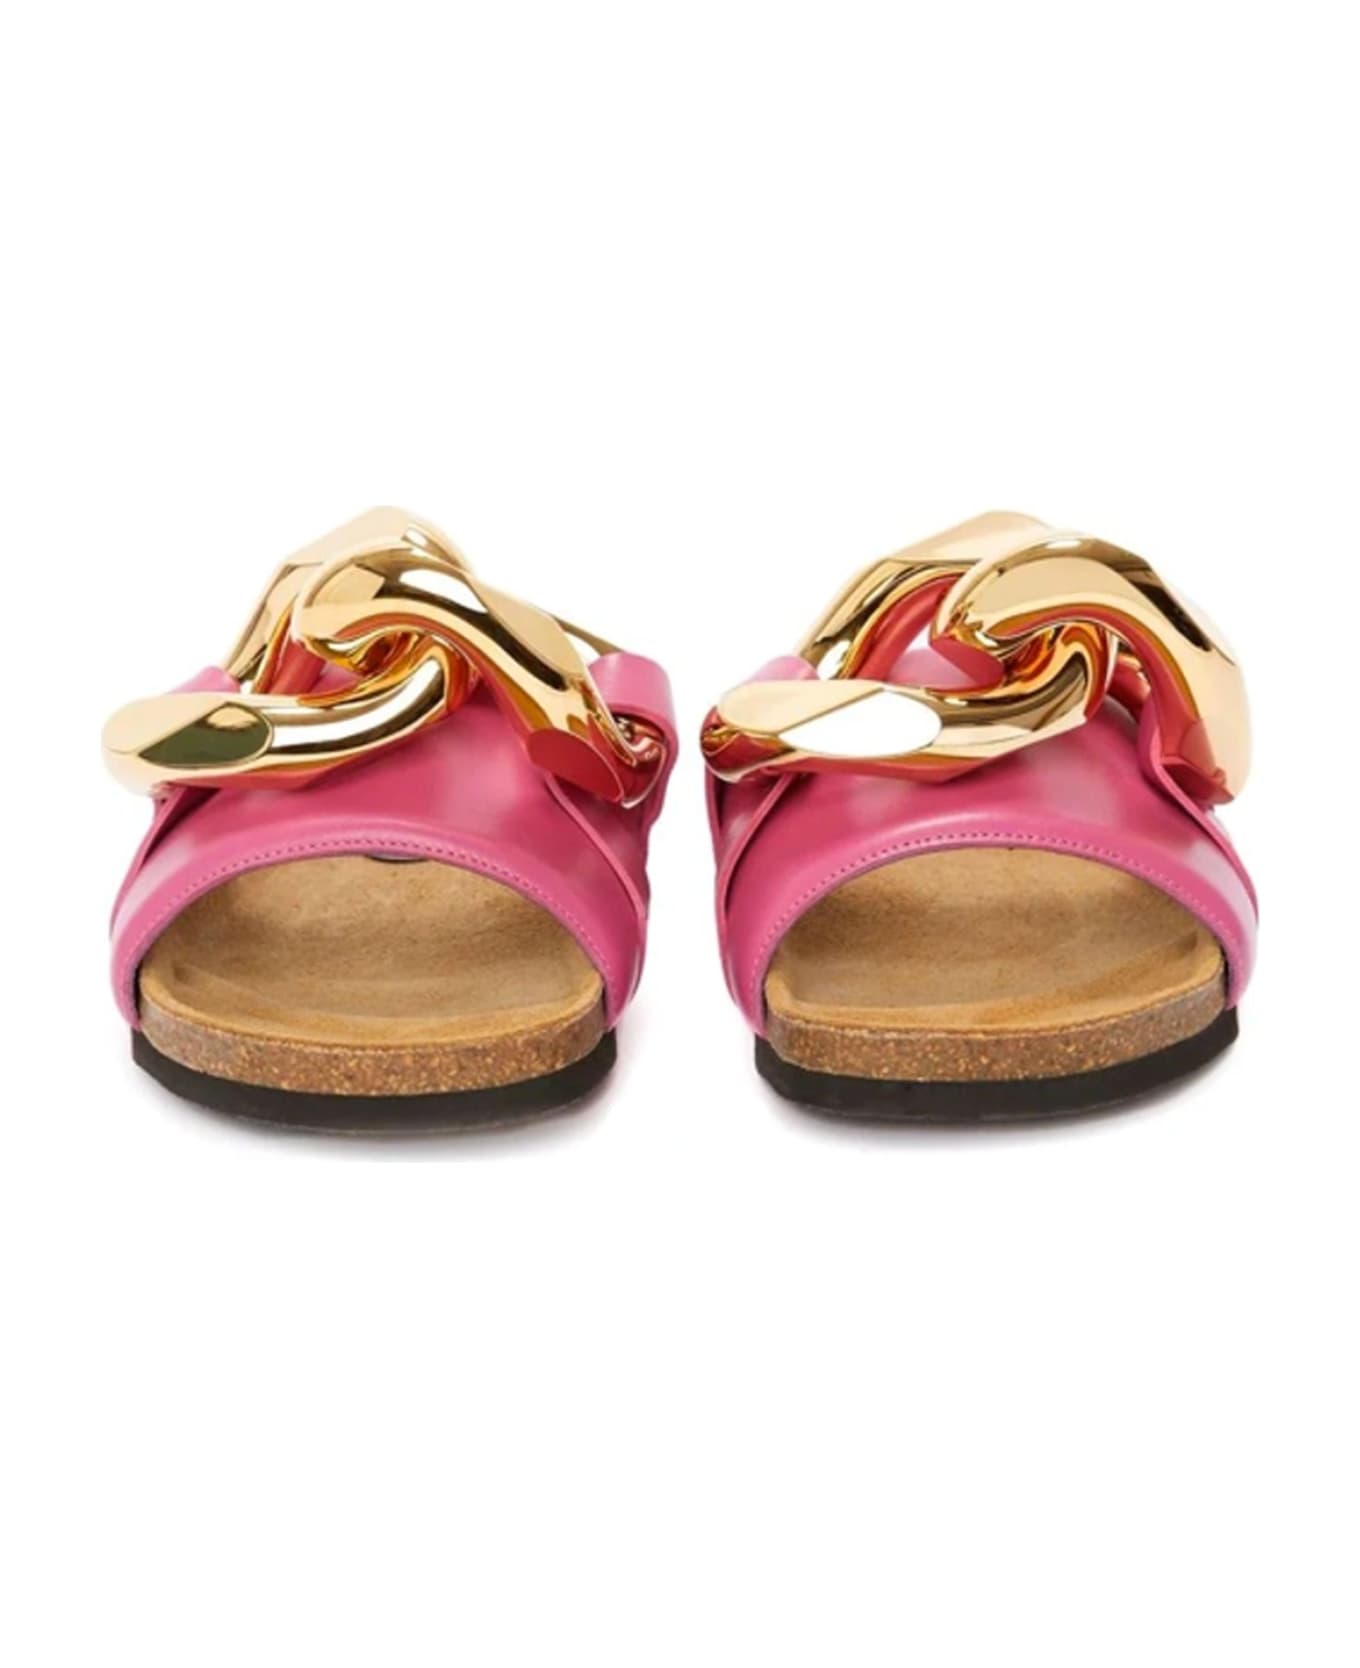 J.W. Anderson Leather Flat Sandals - Pink